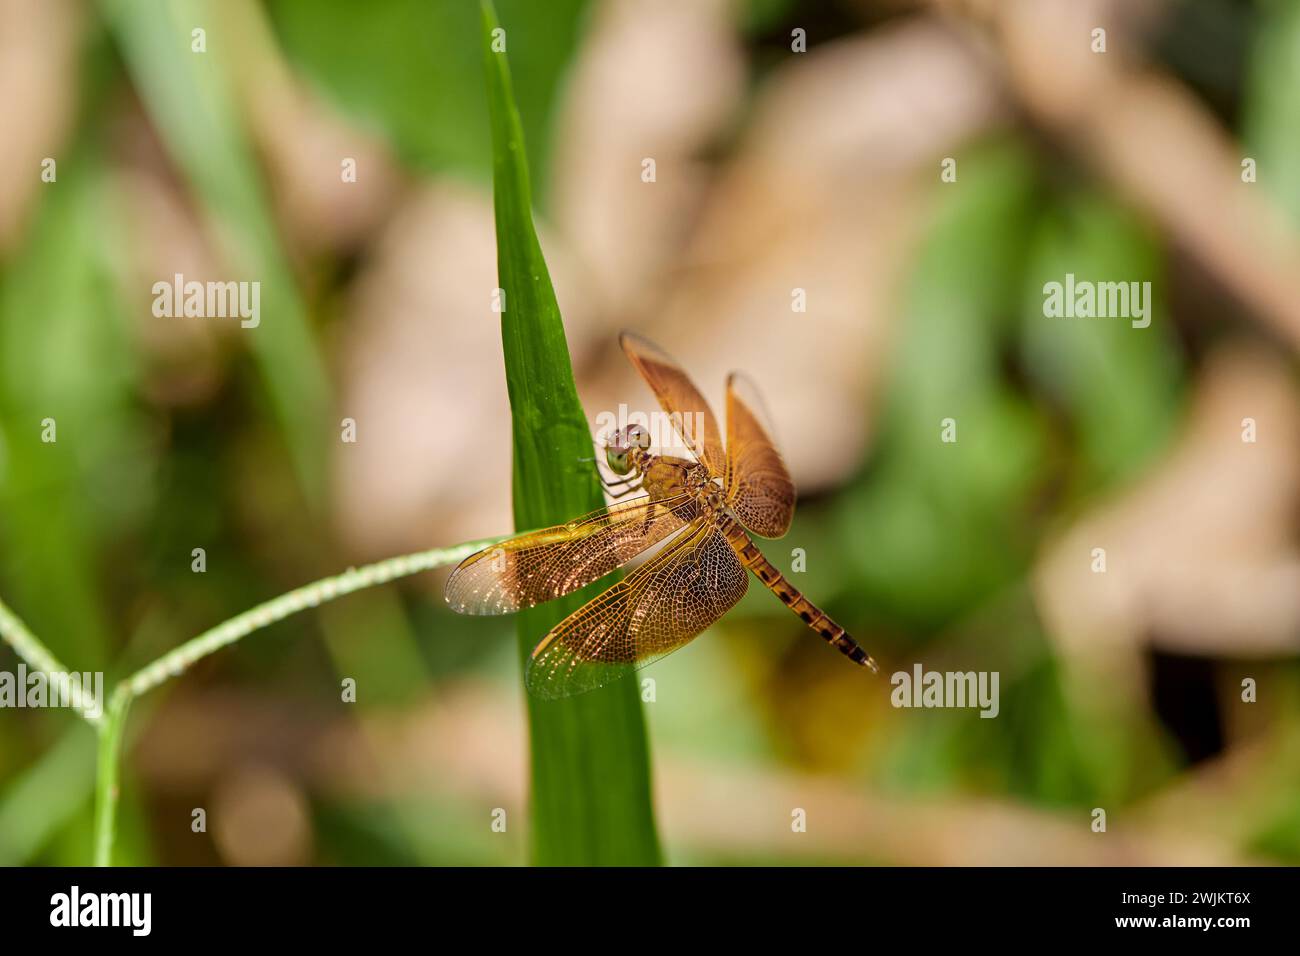 Close-up view of  dragonfly perching on grass Stock Photo